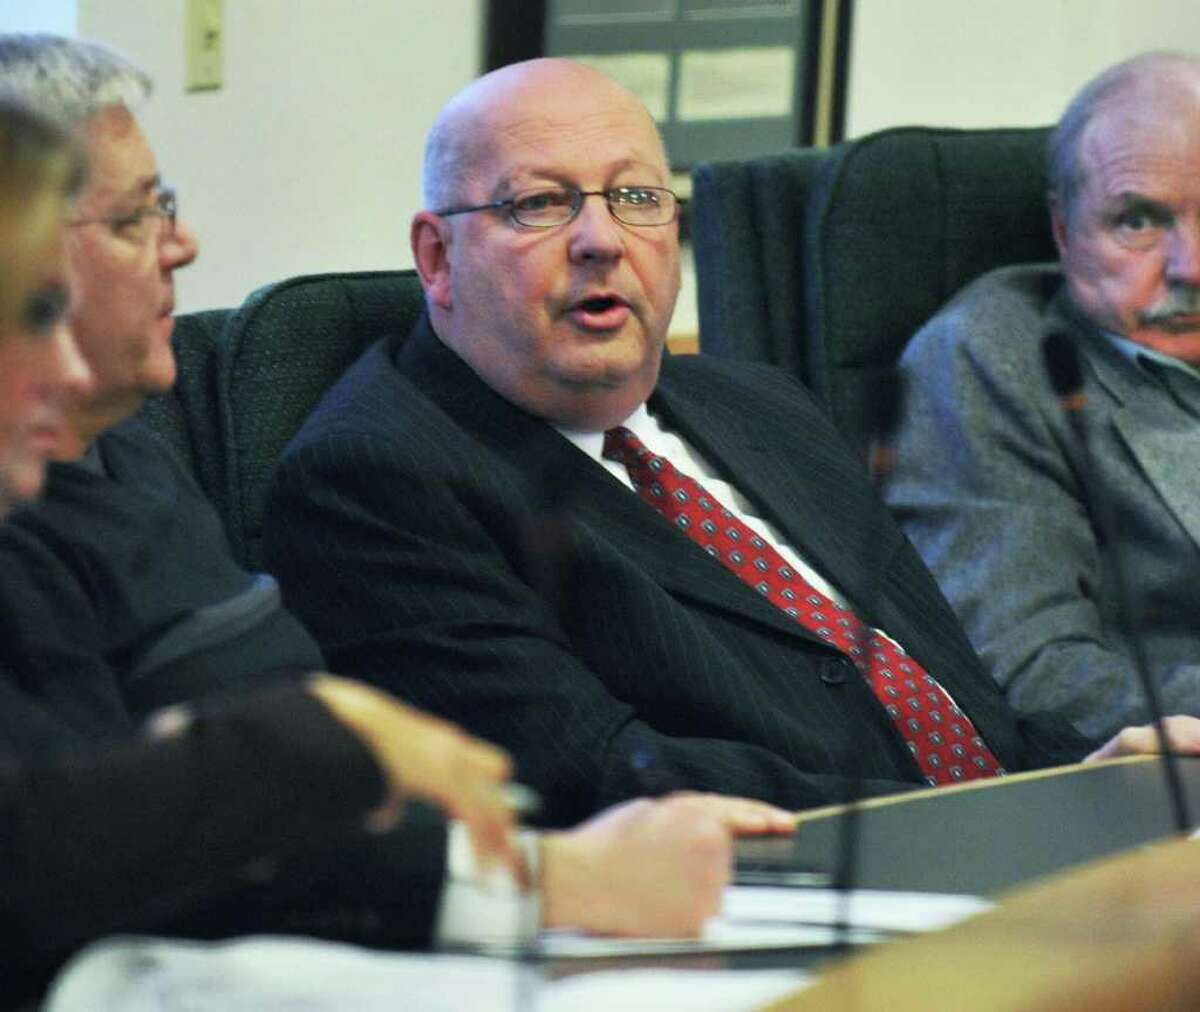 Waterford Supervisor John Lawler, center, during a Saratoga Board of Supervisors' budget workshop session in Ballston Spa Friday Nov. 18, 2011. He stepped down from the board of Saratoga County Prosperity Partnership on Thursday. (John Carl D'Annibale / Times Union)